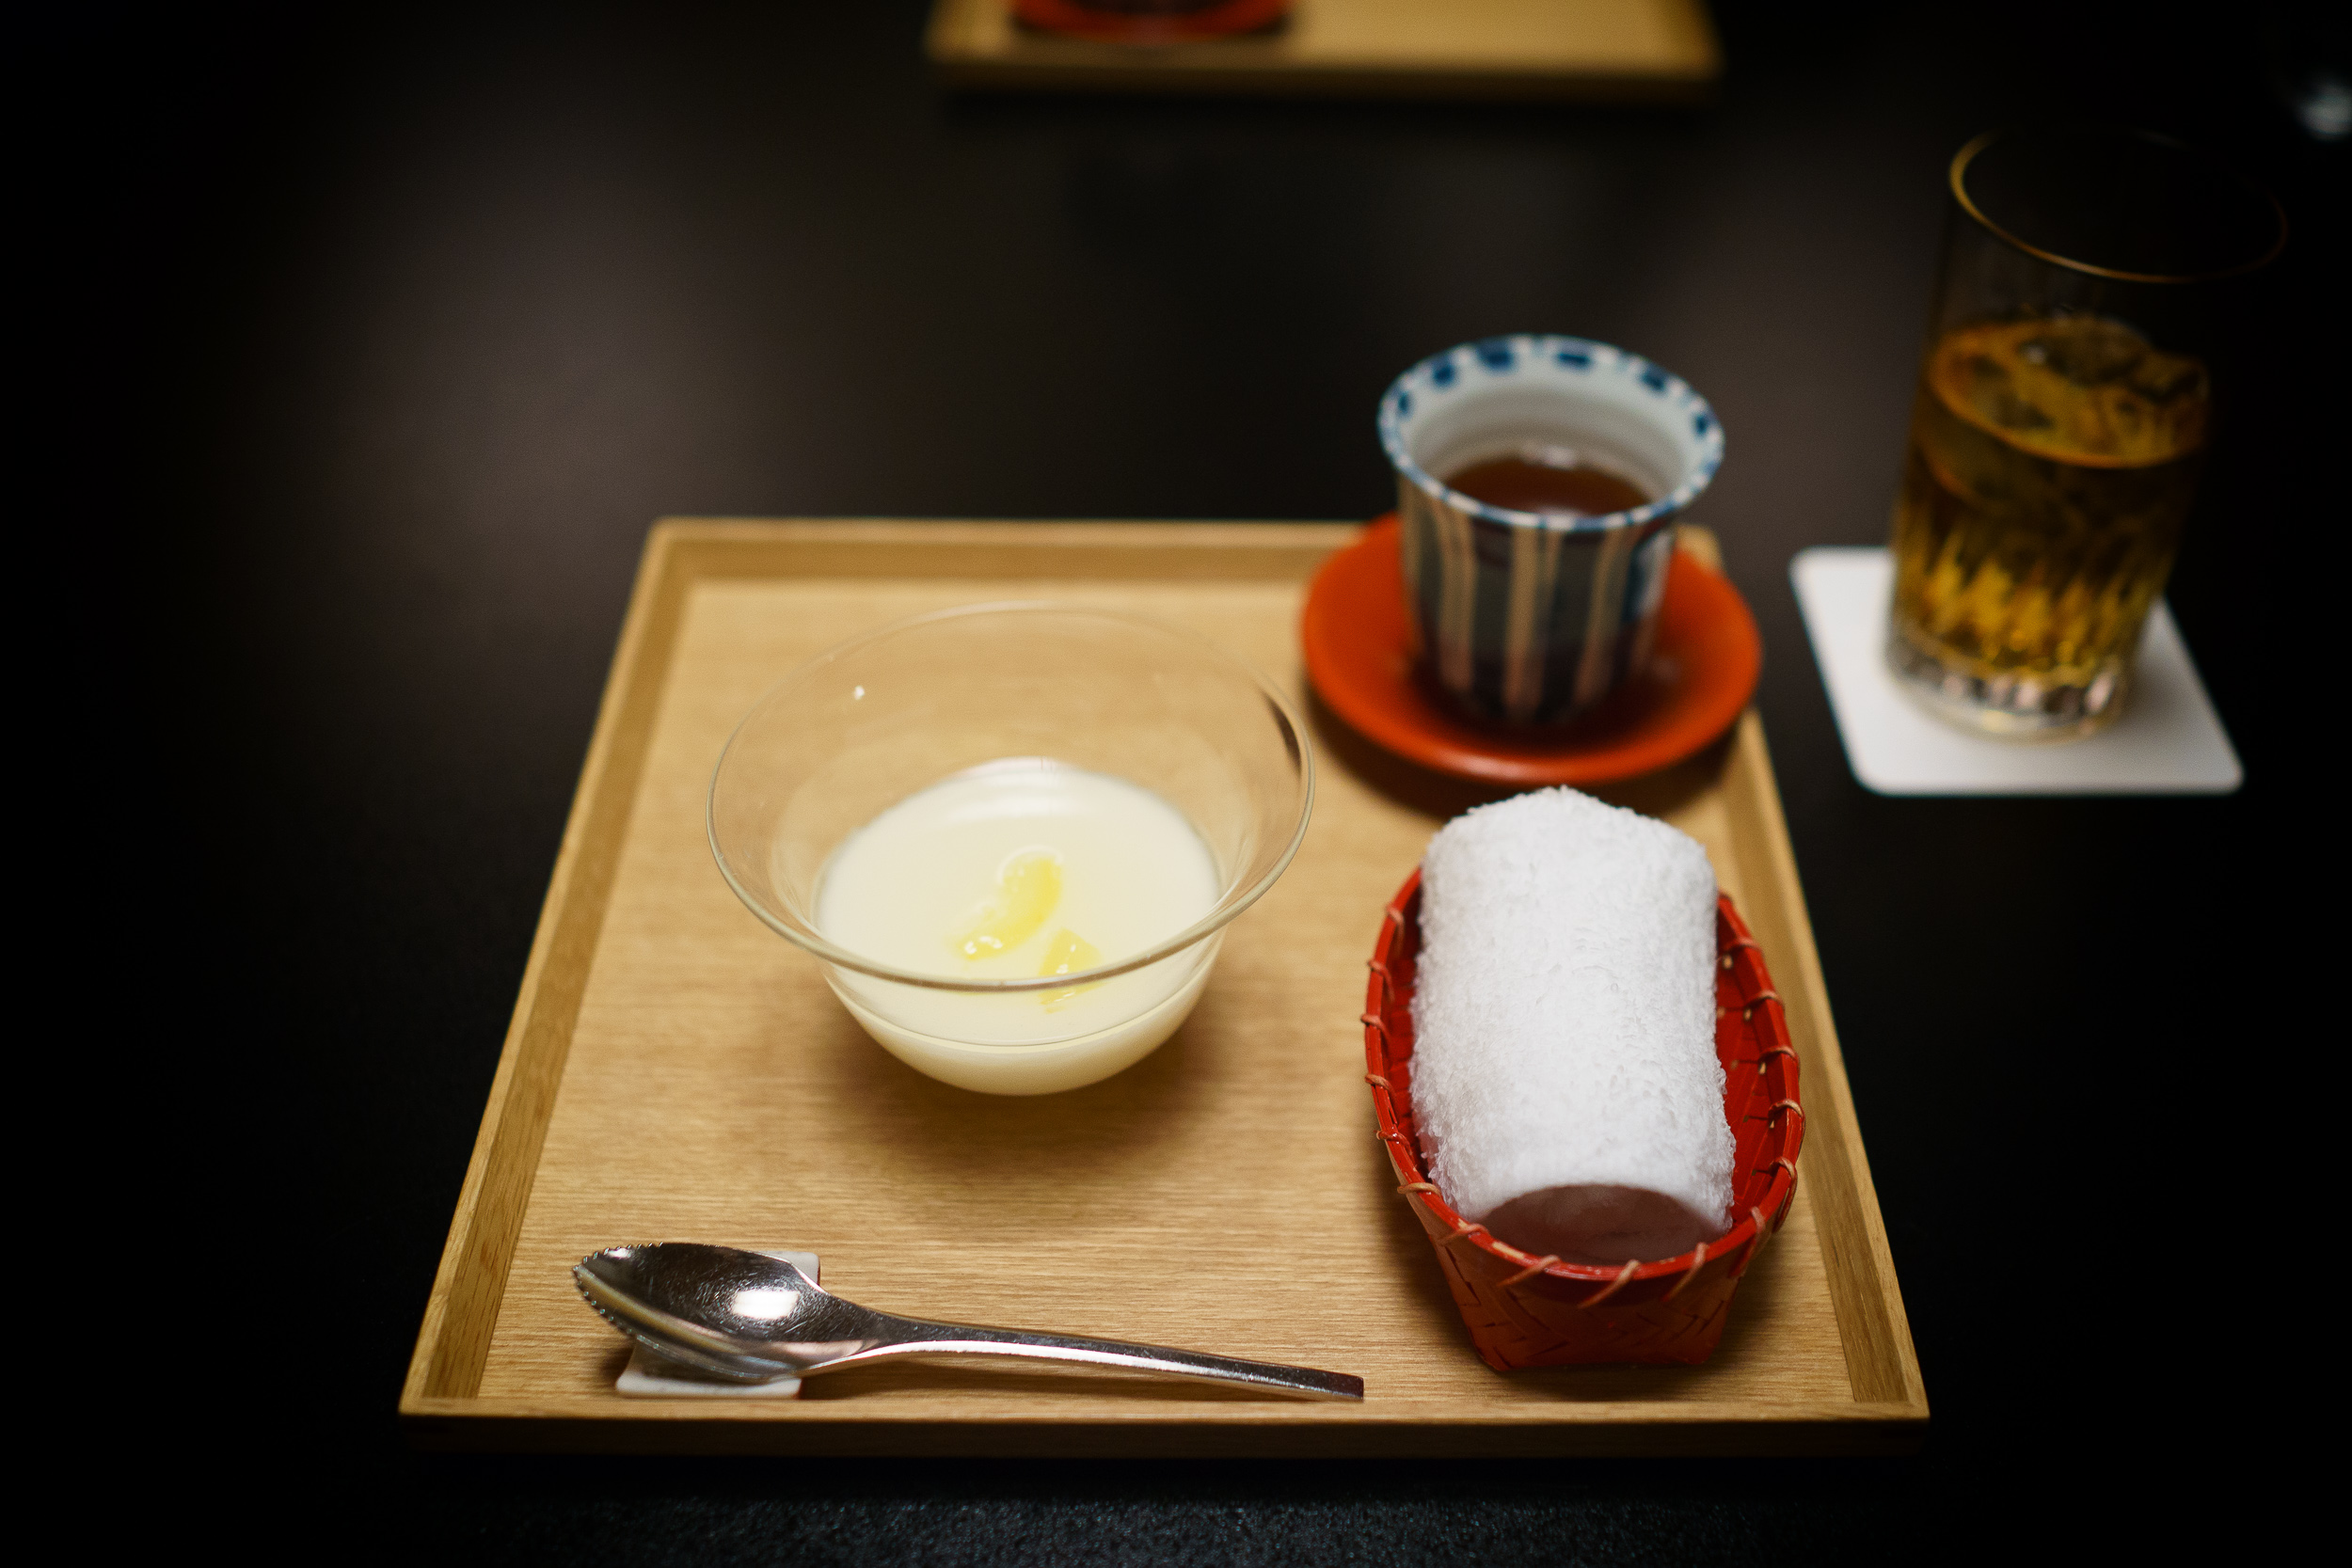 9th Course: Almond jelly with yuzu